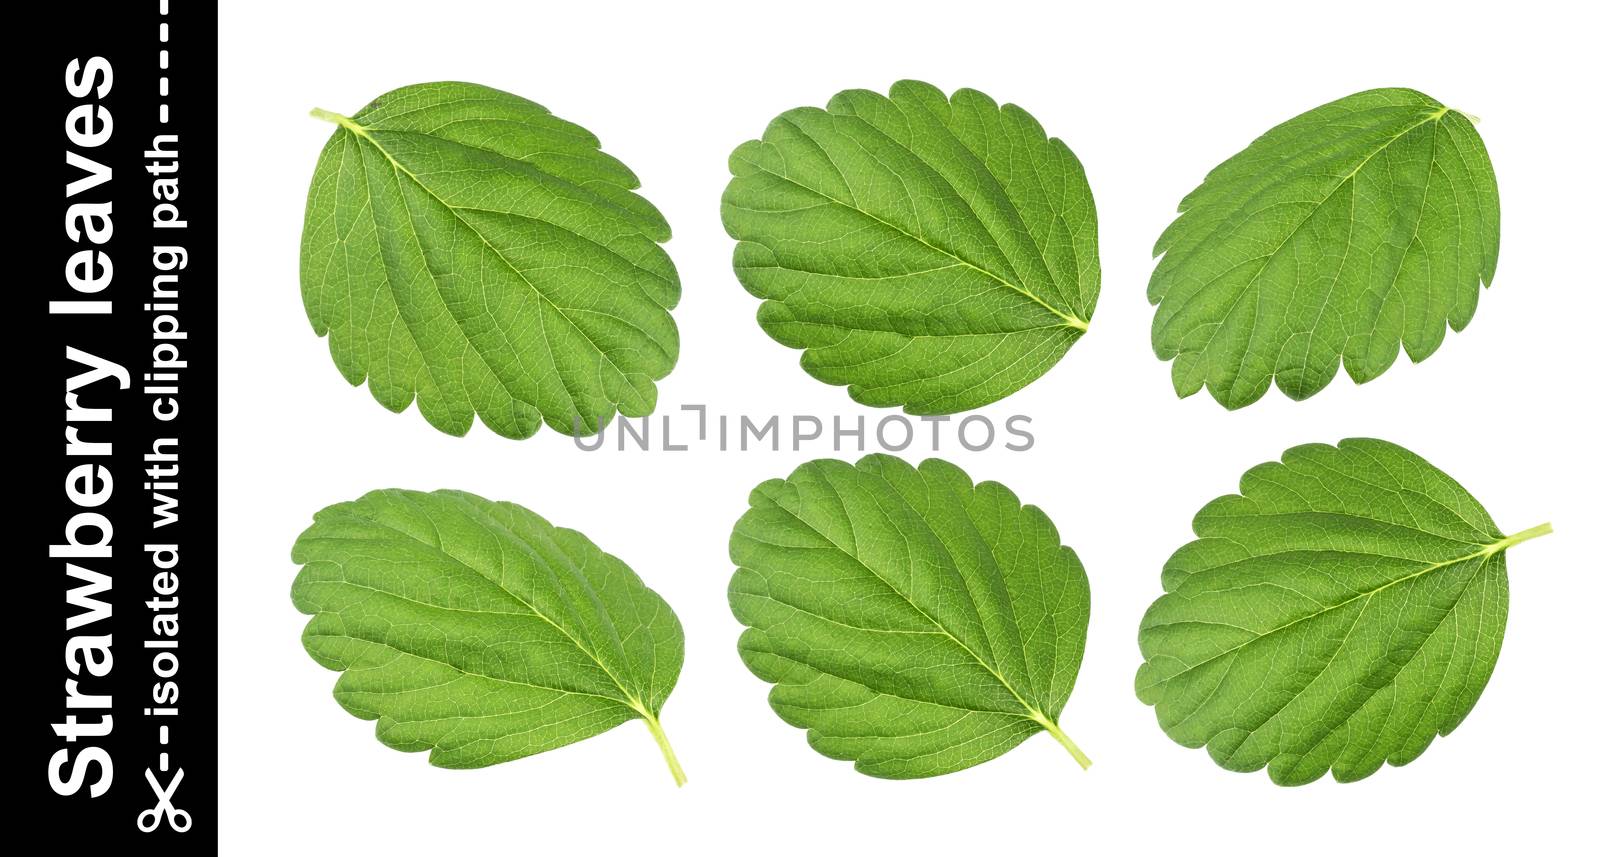 Strawberry leaves isolated on white background with clipping path. Collection